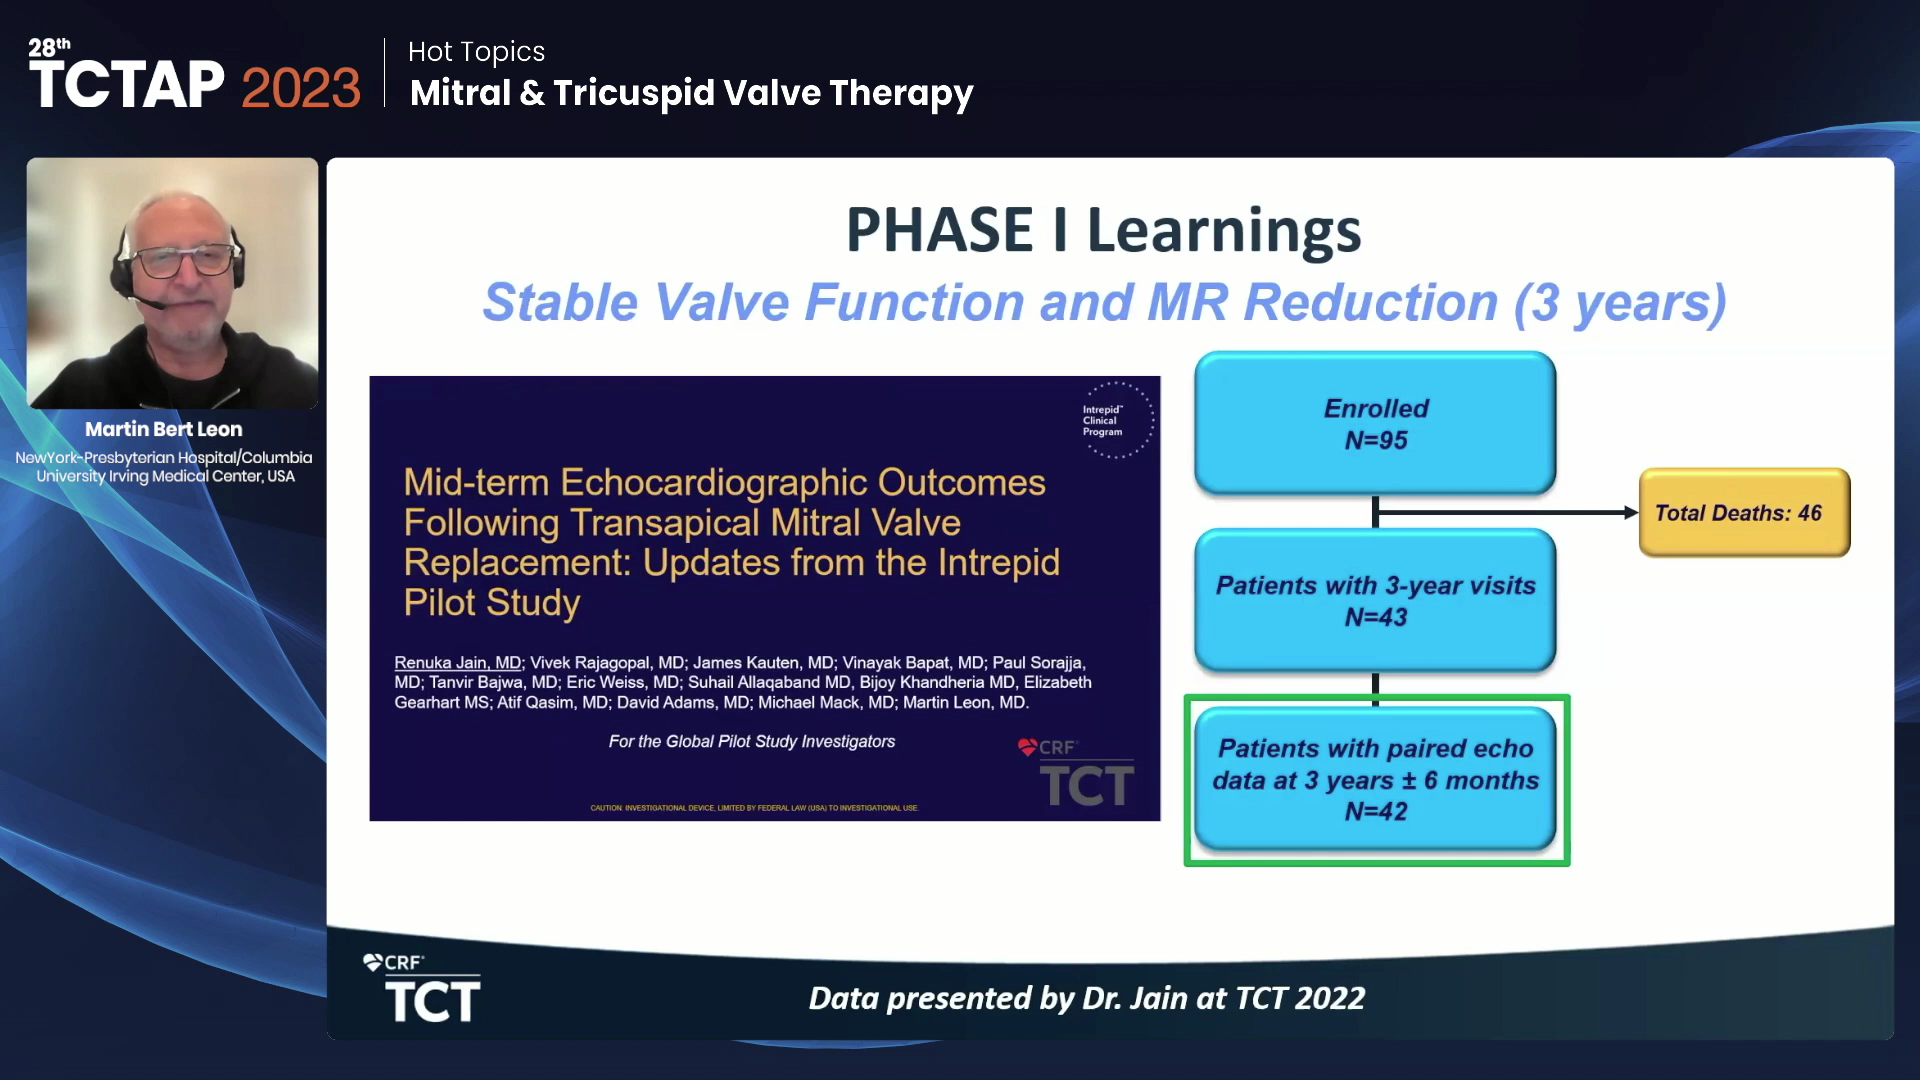 [Hot Topics] Mitral & Tricuspid Valve Therapy